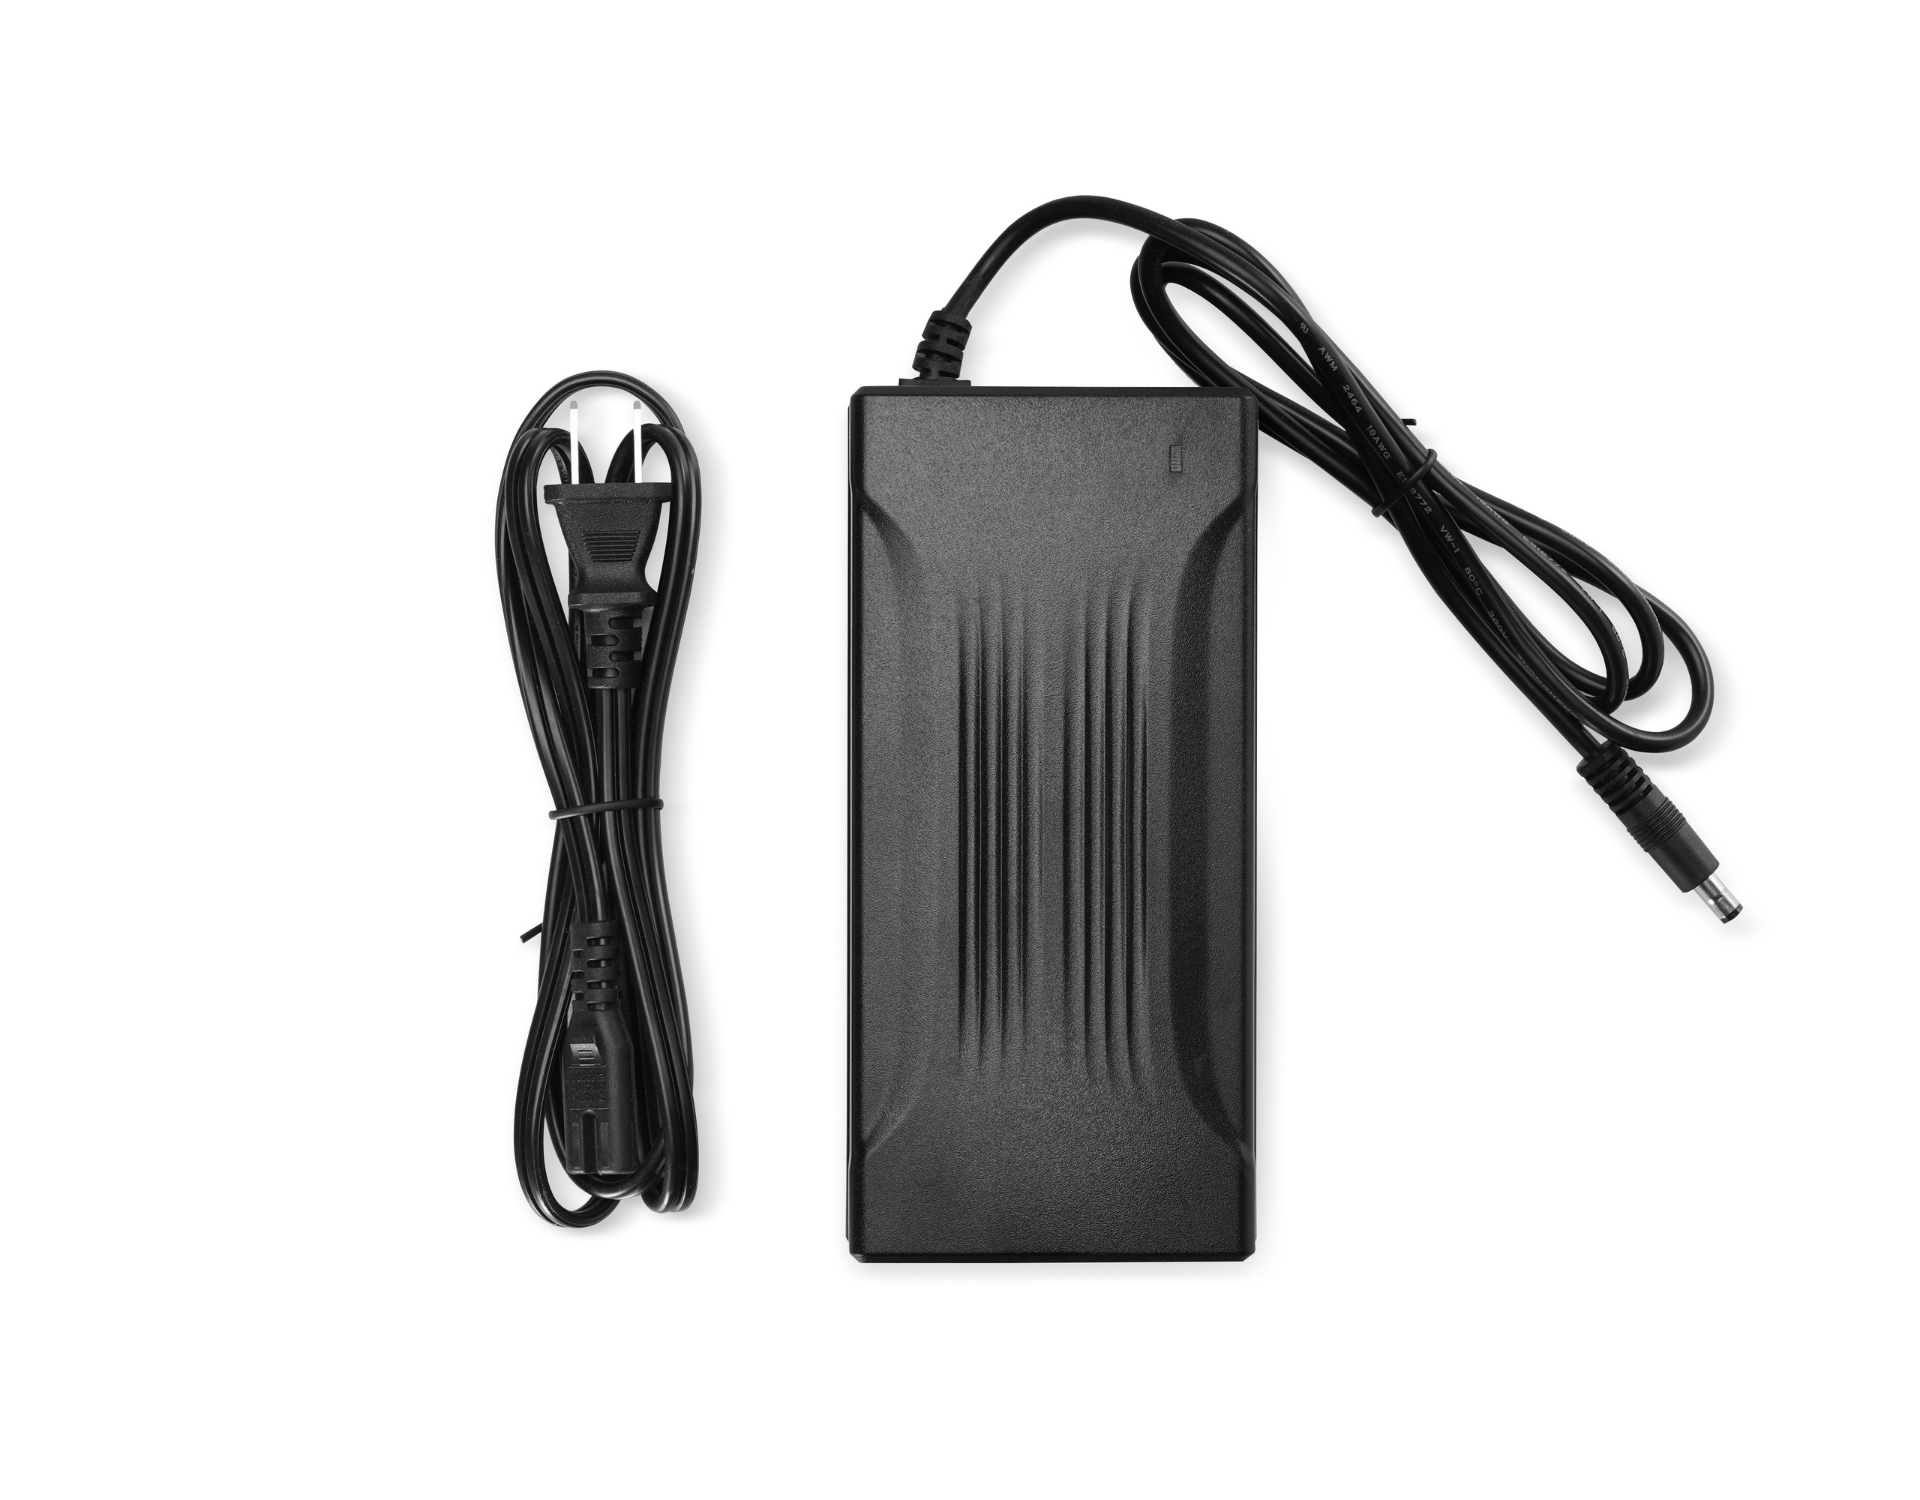 Vetanya 3.0A Battery Fast Charger